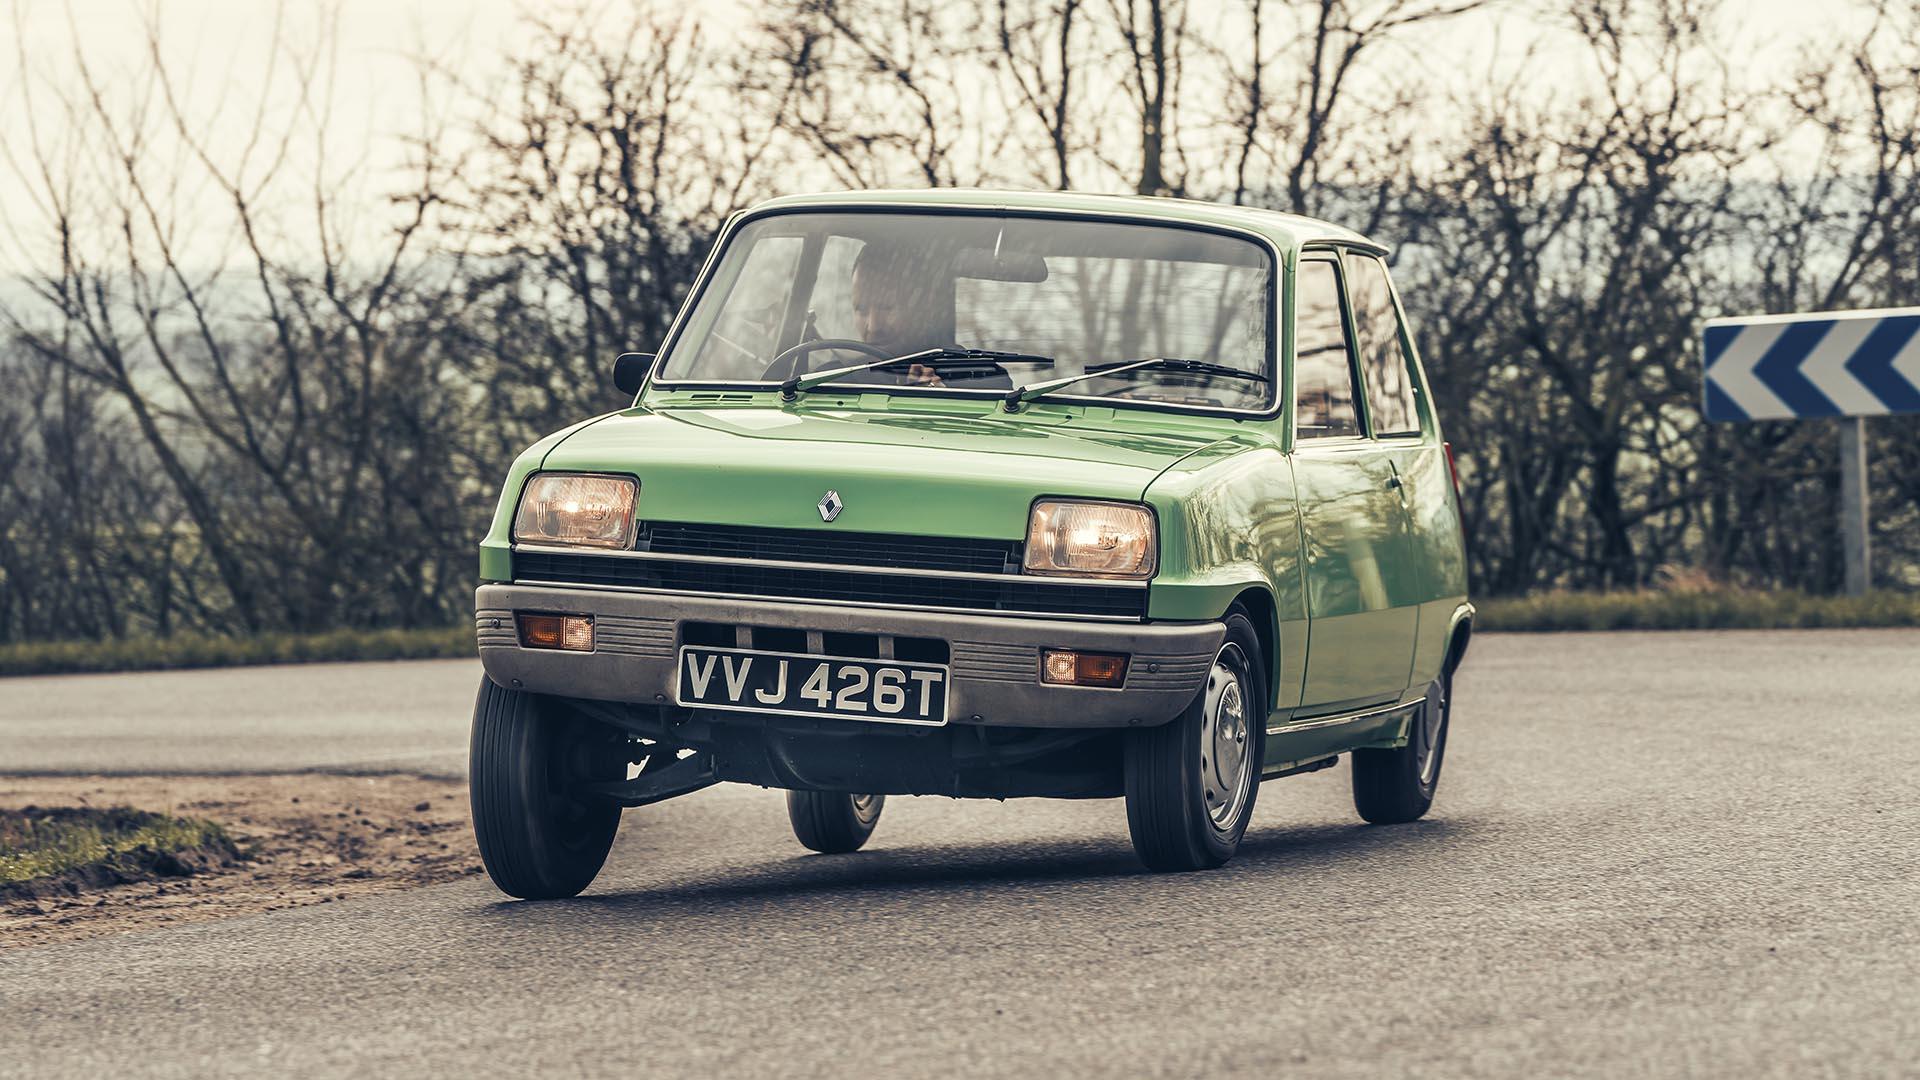 Top Gear Magazine 226 content: old Renault 5